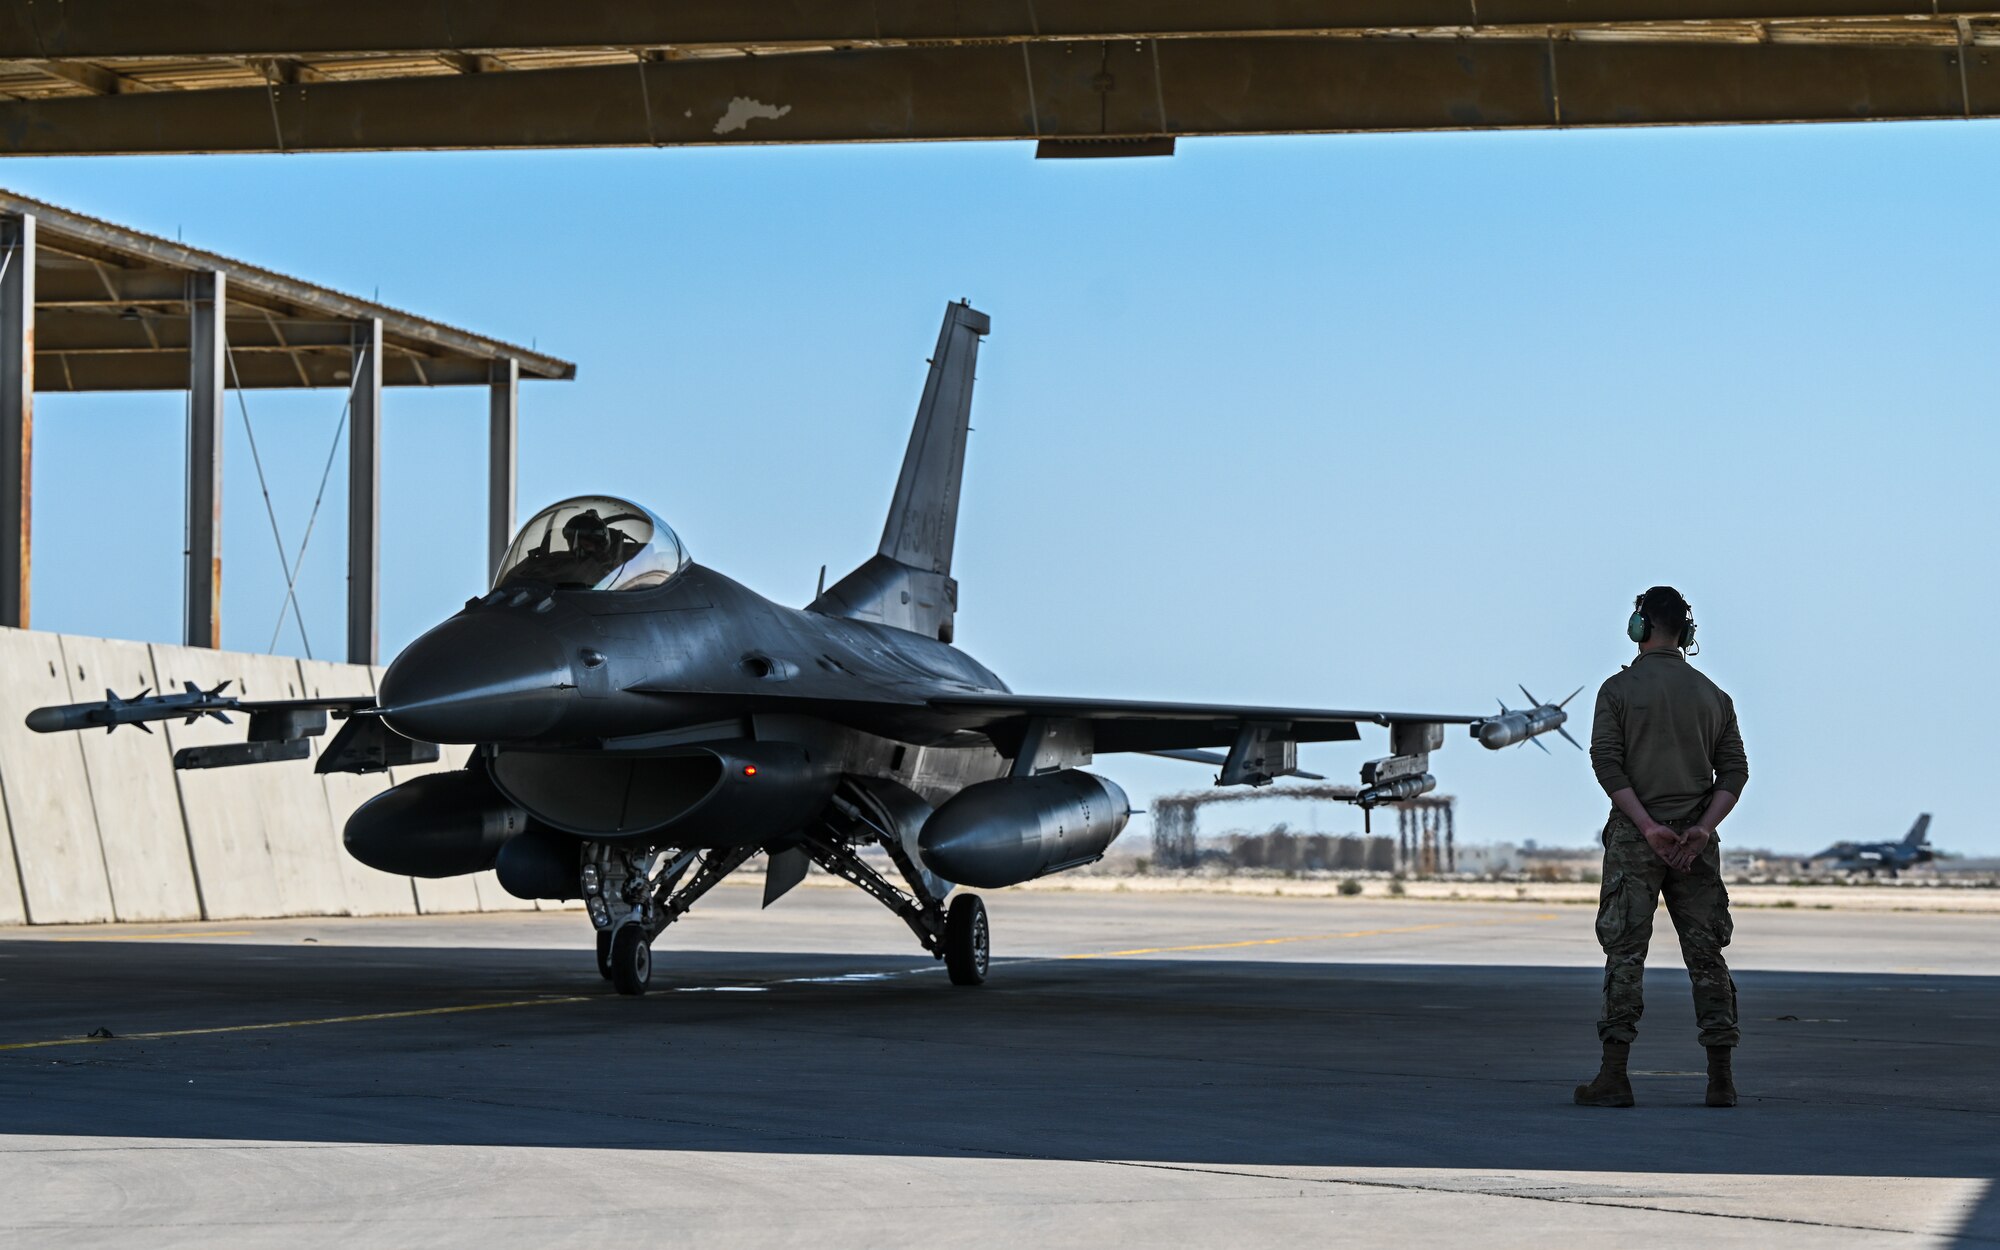 U.S. Air Force Tech. Sgt. Van Fossan, 378th Expeditionary Maintenance Squadron crew chief, conducts pre-flight checks for an F-16 Fighting Falcon at King Abdulaziz Air Base, Kingdom of Saudi Arabia, Feb. 16, 2022. Service members from the U.S., KSA, Pakistan and Bahrain conducted combined operations to better integrate partner capabilities. (U.S. Air Force photo by Staff Sgt. Christina A. Graves)